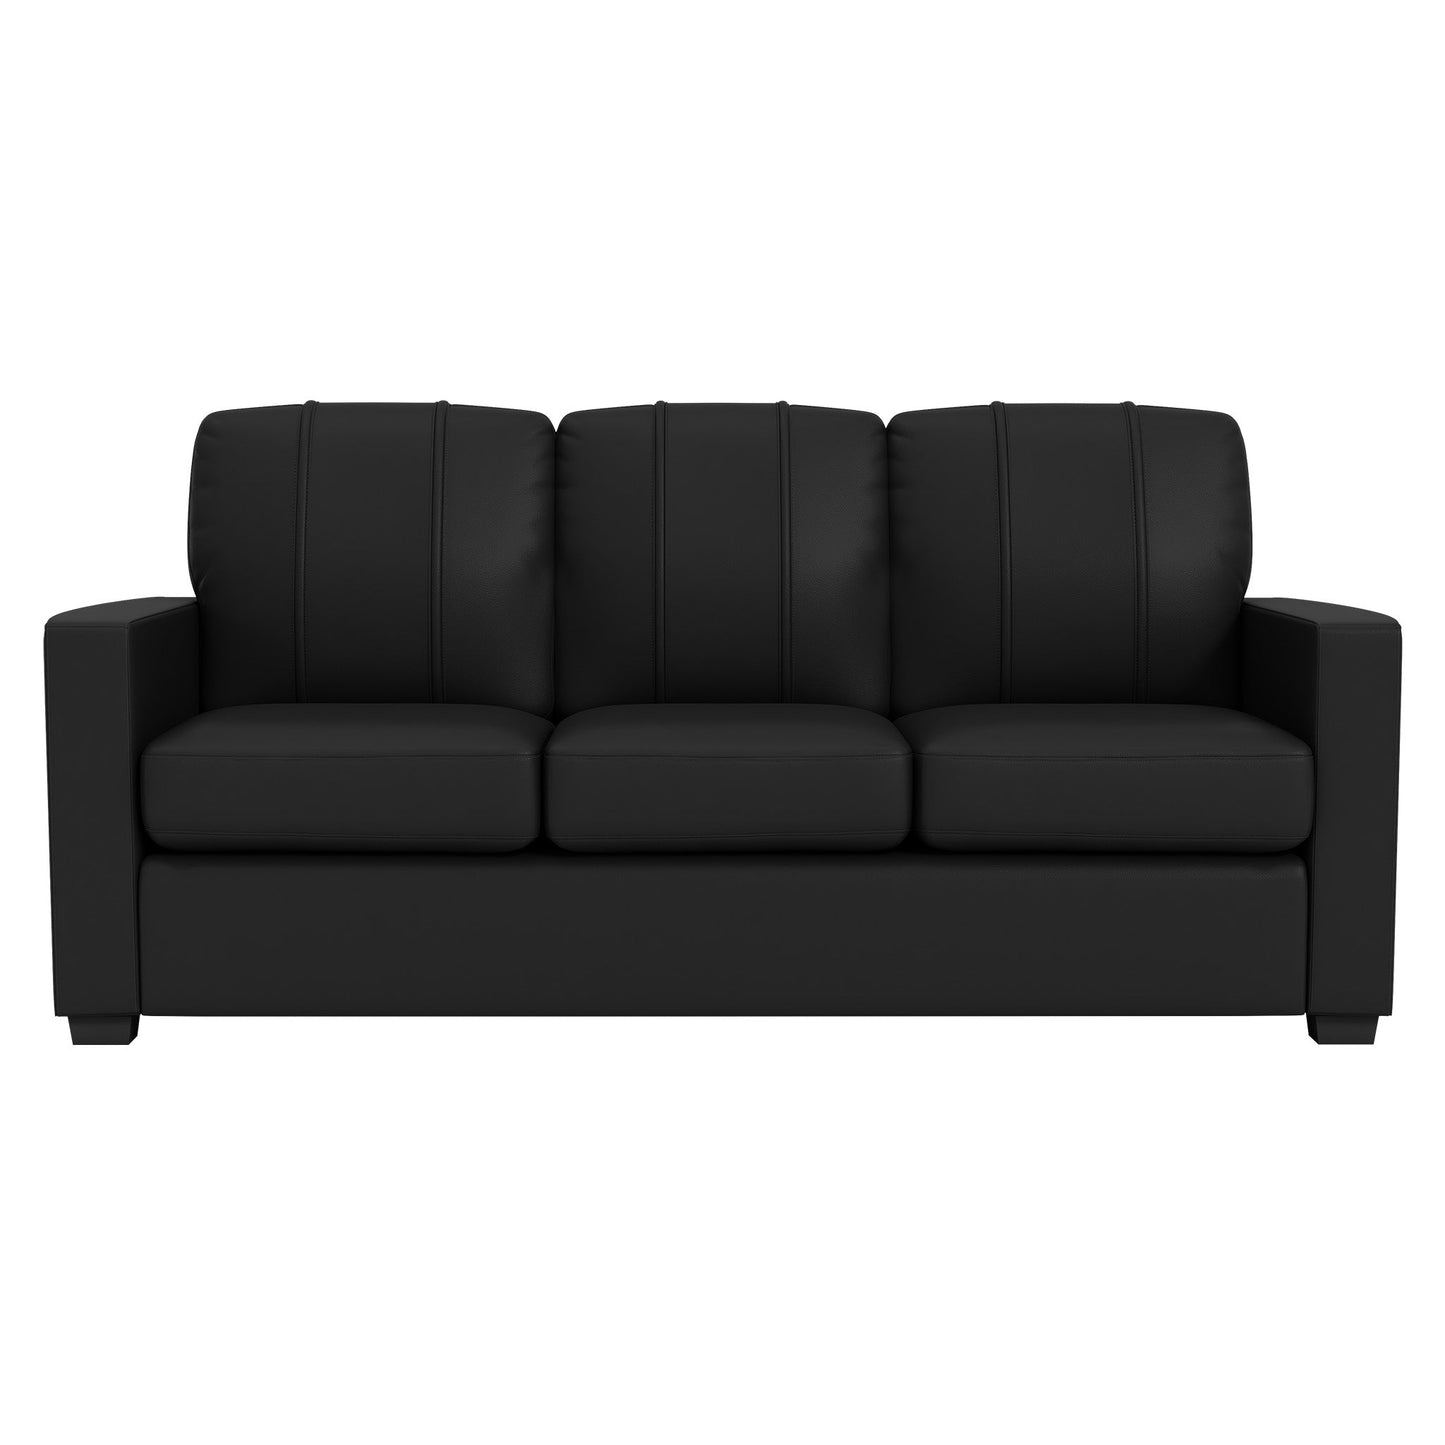 Silver Sofa with Minnesota Twins Secondary